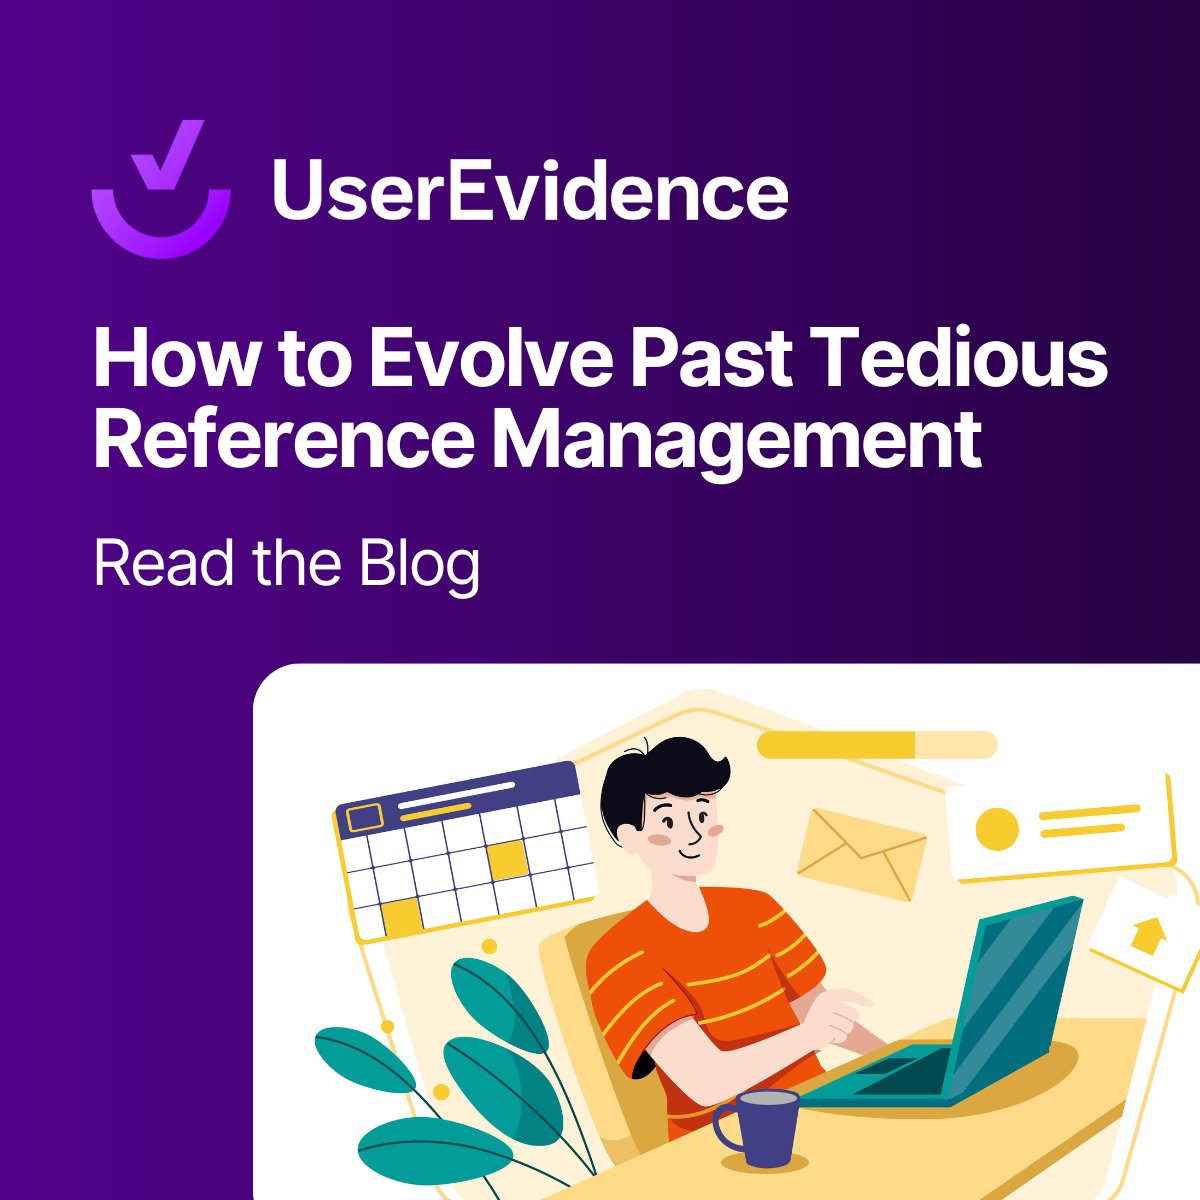 #Customerevidence provides real, trustworthy metrics for prospective customers to consider while influencing their final purchase decision. By adopting the right technology, #customermarketing teams streamline their #referencemanagement process. 

userevidence.com/blog/how-to-ev…